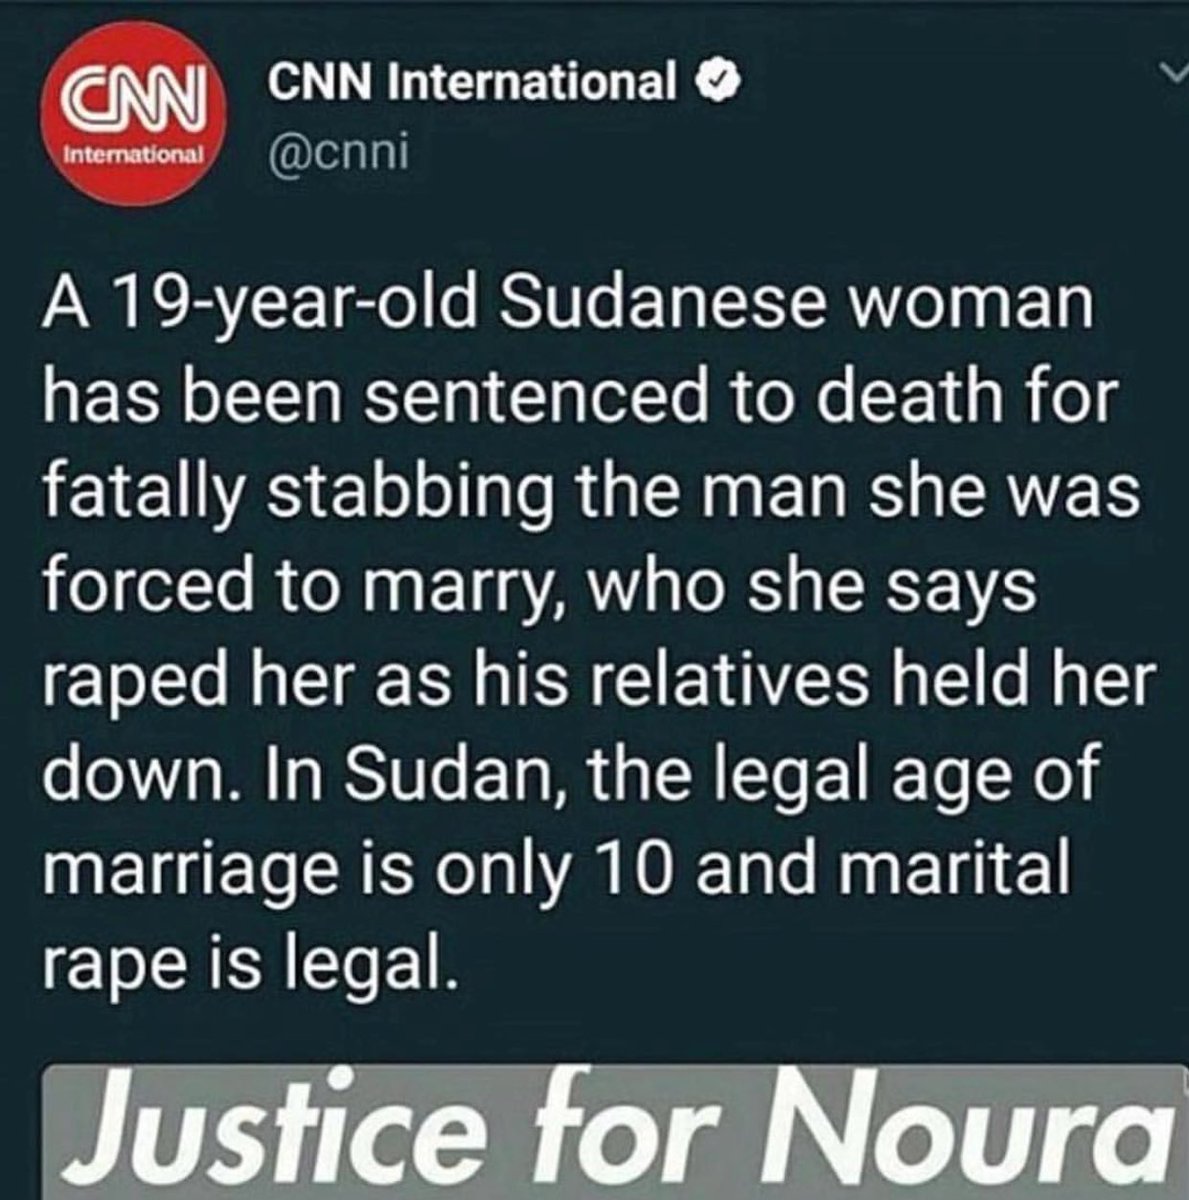 There will be a demonstration Saturday to protest the prosecution of this young girl who has been sentenced to hang for self defence.  #JusticeForNoura #EndEarlyMarriages